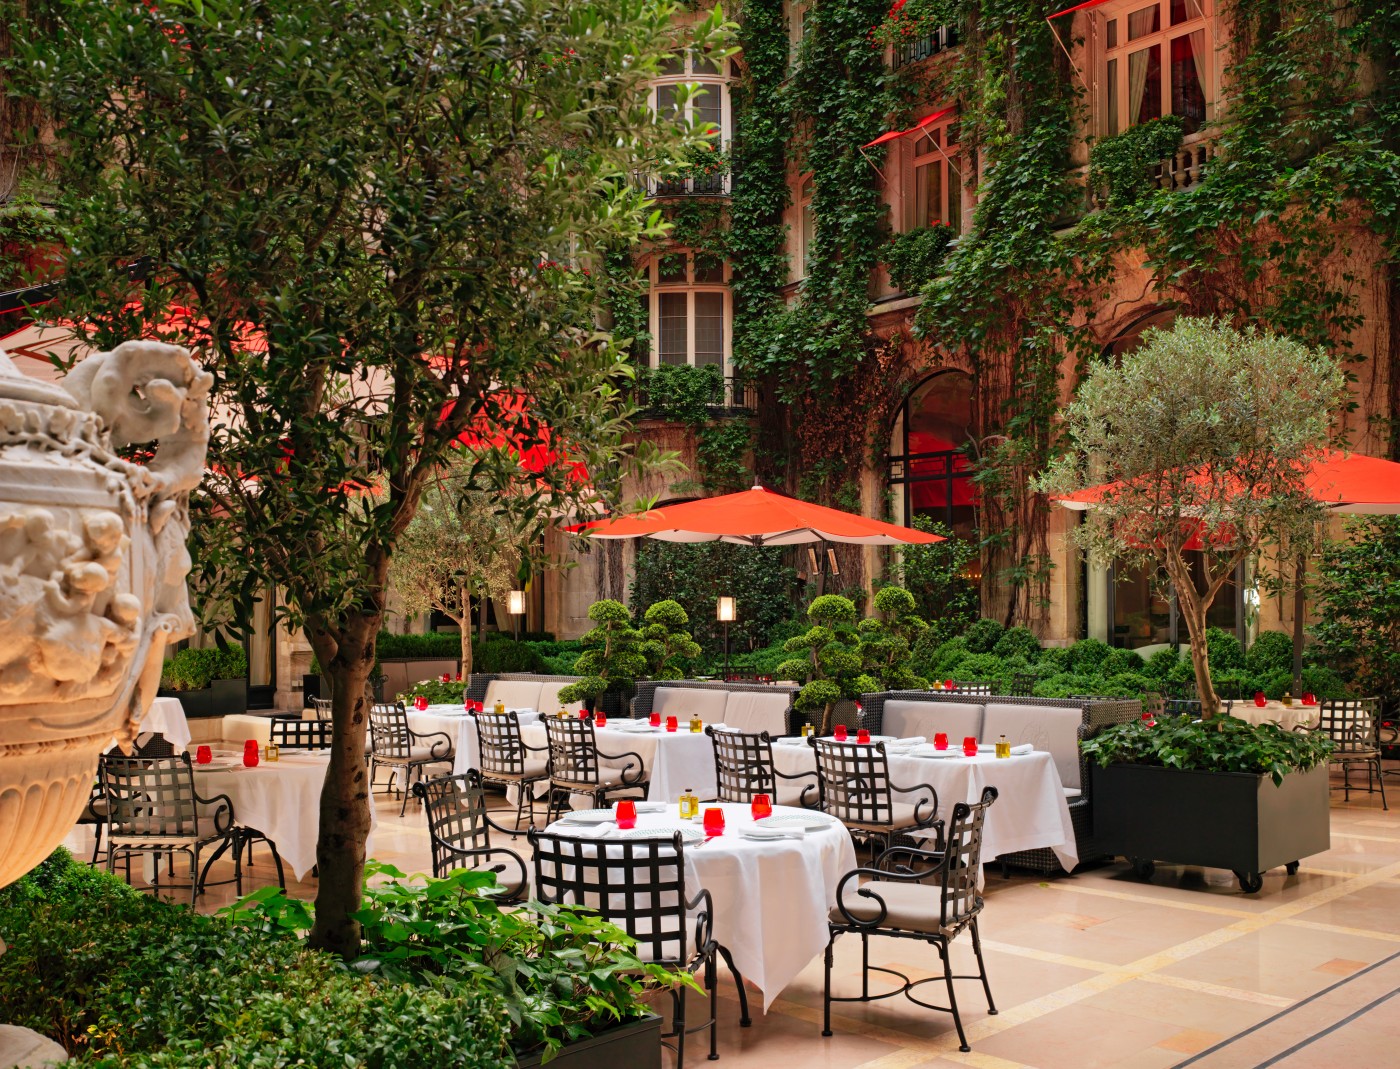 Plaza Athenee - Cour Jardin - (c) Niall Clutton